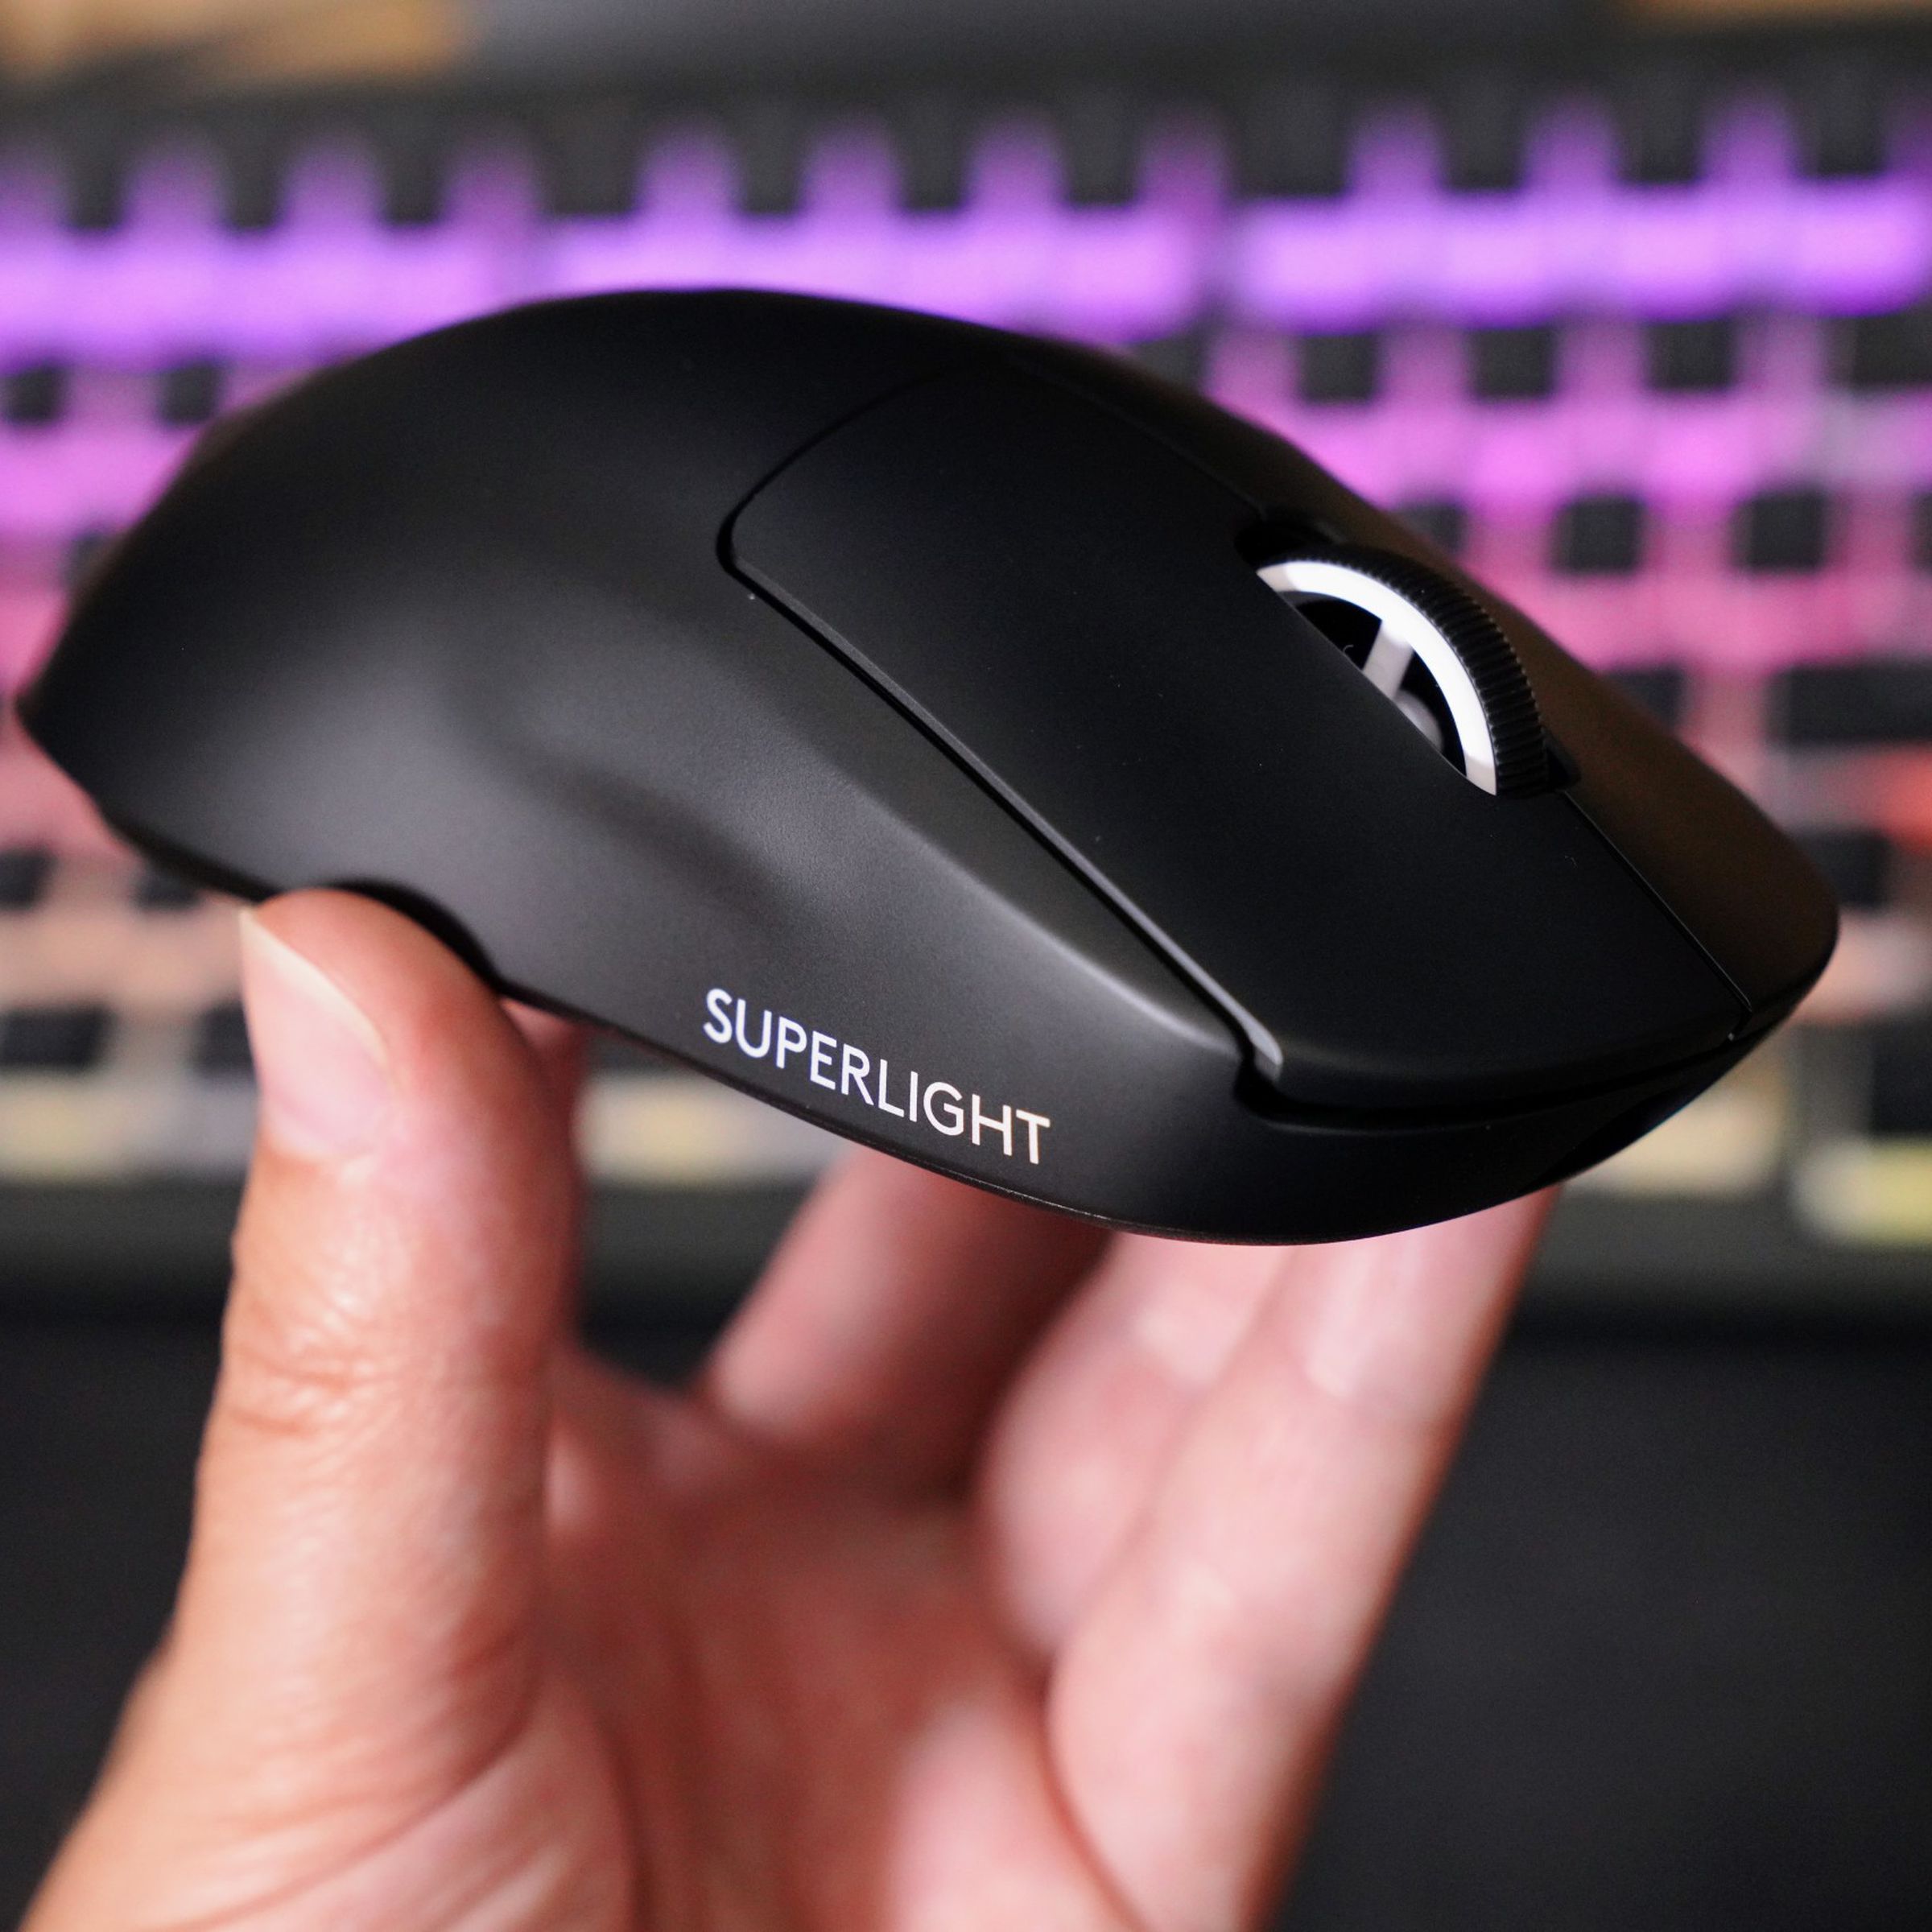 A hand holds up a jet black sculpted plastic mouse with a white scroll wheel and white words “Superlight” printed on the side.